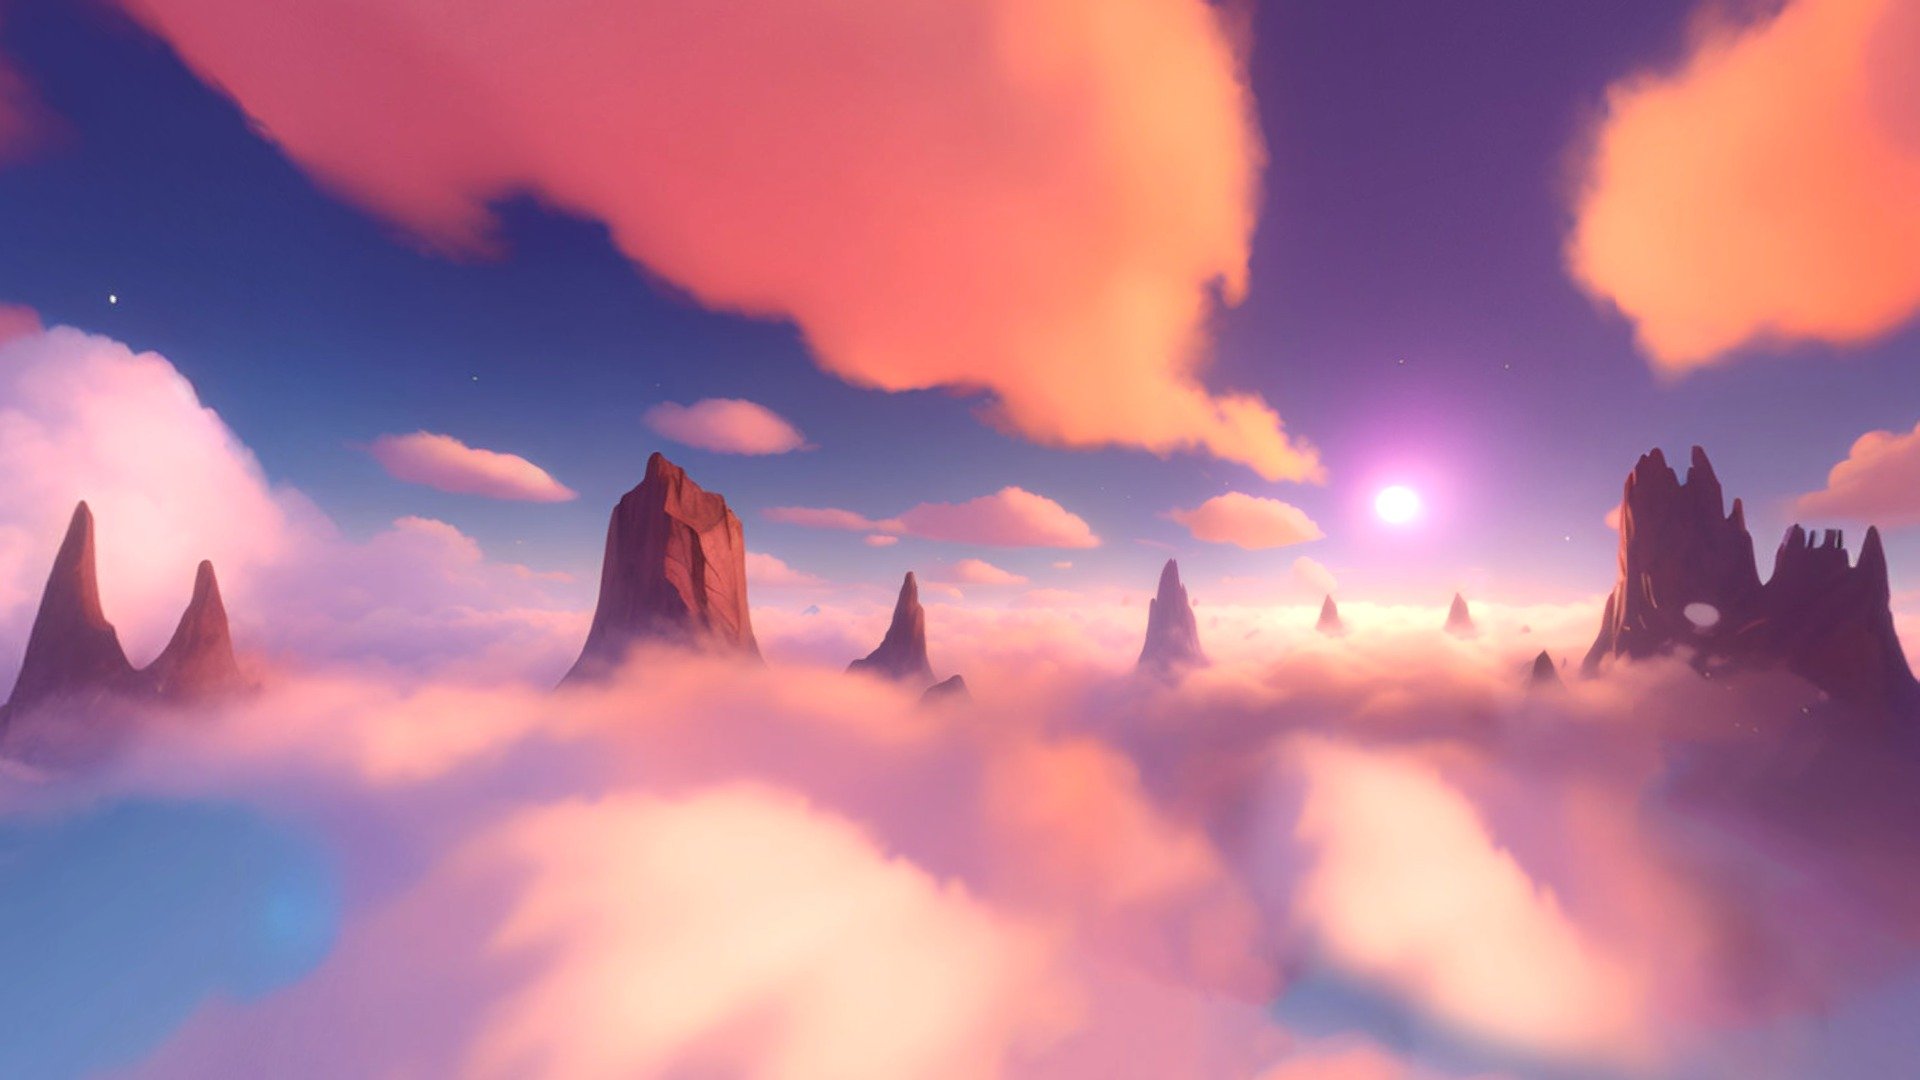 Beautiful stylized dreamy skybox. Perfect for beautiful, stylized environments and your rendering scene.

The package contains one panorama texture and one cubemap texture (png)

panorama texture: 6144 x 3072
cubemap texture: 6144 x 4608
The sizes can be changed in your graphics program as desired

( textures are under Other available downloads)

used: AI, Photoshop

*-------------Terms of Use--------------

Commercial use of the assets provided is permitted but cannot be included in an asset pack or sold at any sort of asset/resource marketplace or be shared for free* - SkyBox 002 - Buy Royalty Free 3D model by stylized skybox (@skybox_) 3d model